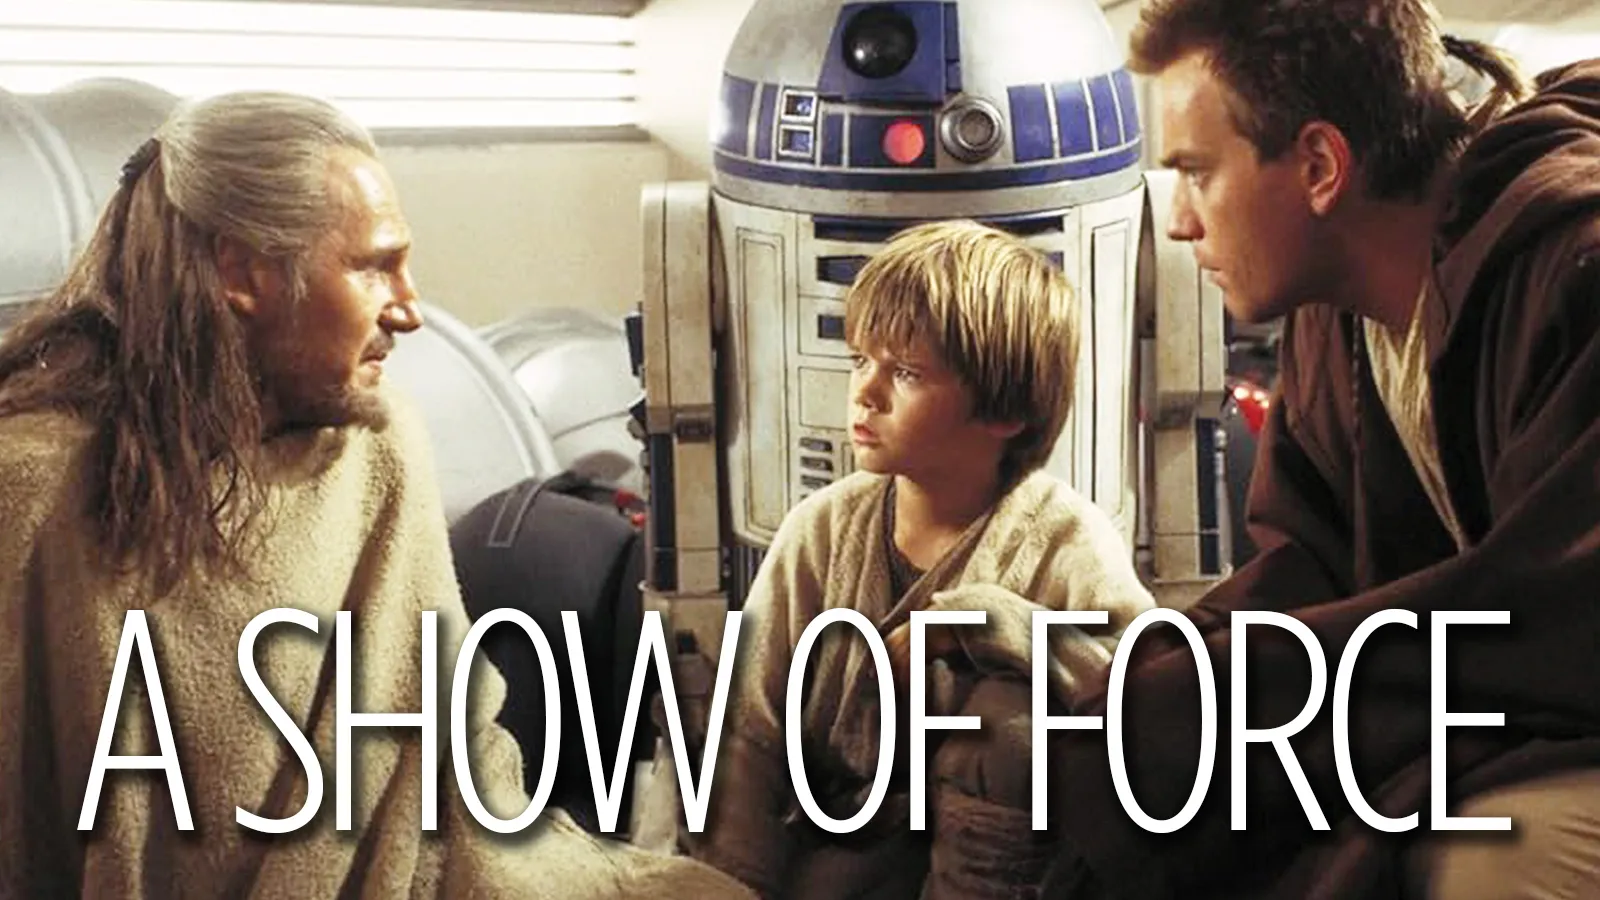 A still from The Phantom Menace showing Obi-Wan, played by Ewan Mcgregor, Qui-Gon Jinn, played by Liam Neeson, Anakin Skywalker, played by Jake Lloyd and R2D2 talking.